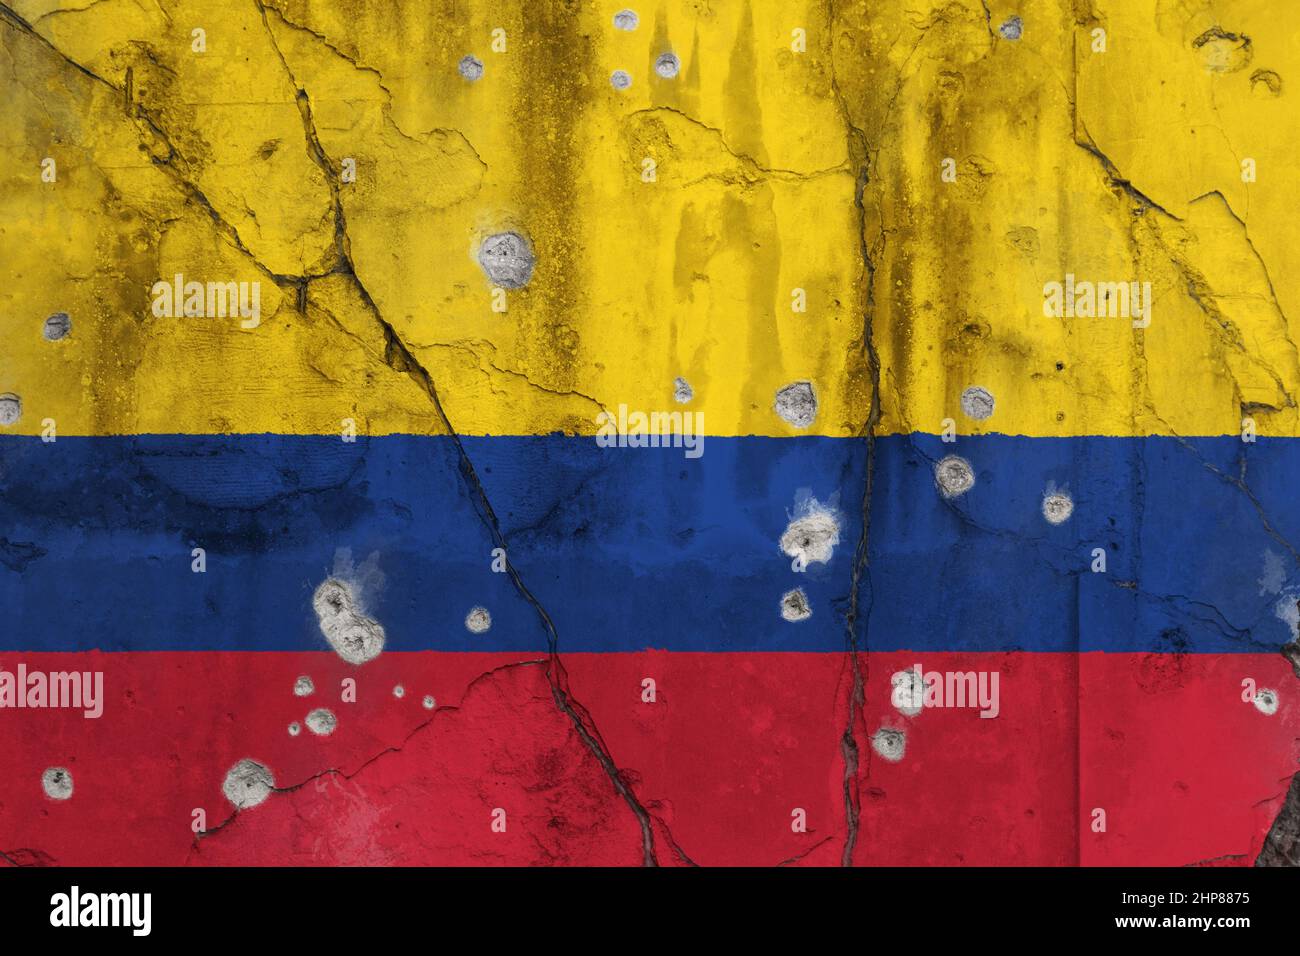 Full frame photo of a weathered flag of Colombia painted on a cracked concrete wall with bullet holes. Colombian conflict and war on drugs concept. Stock Photo